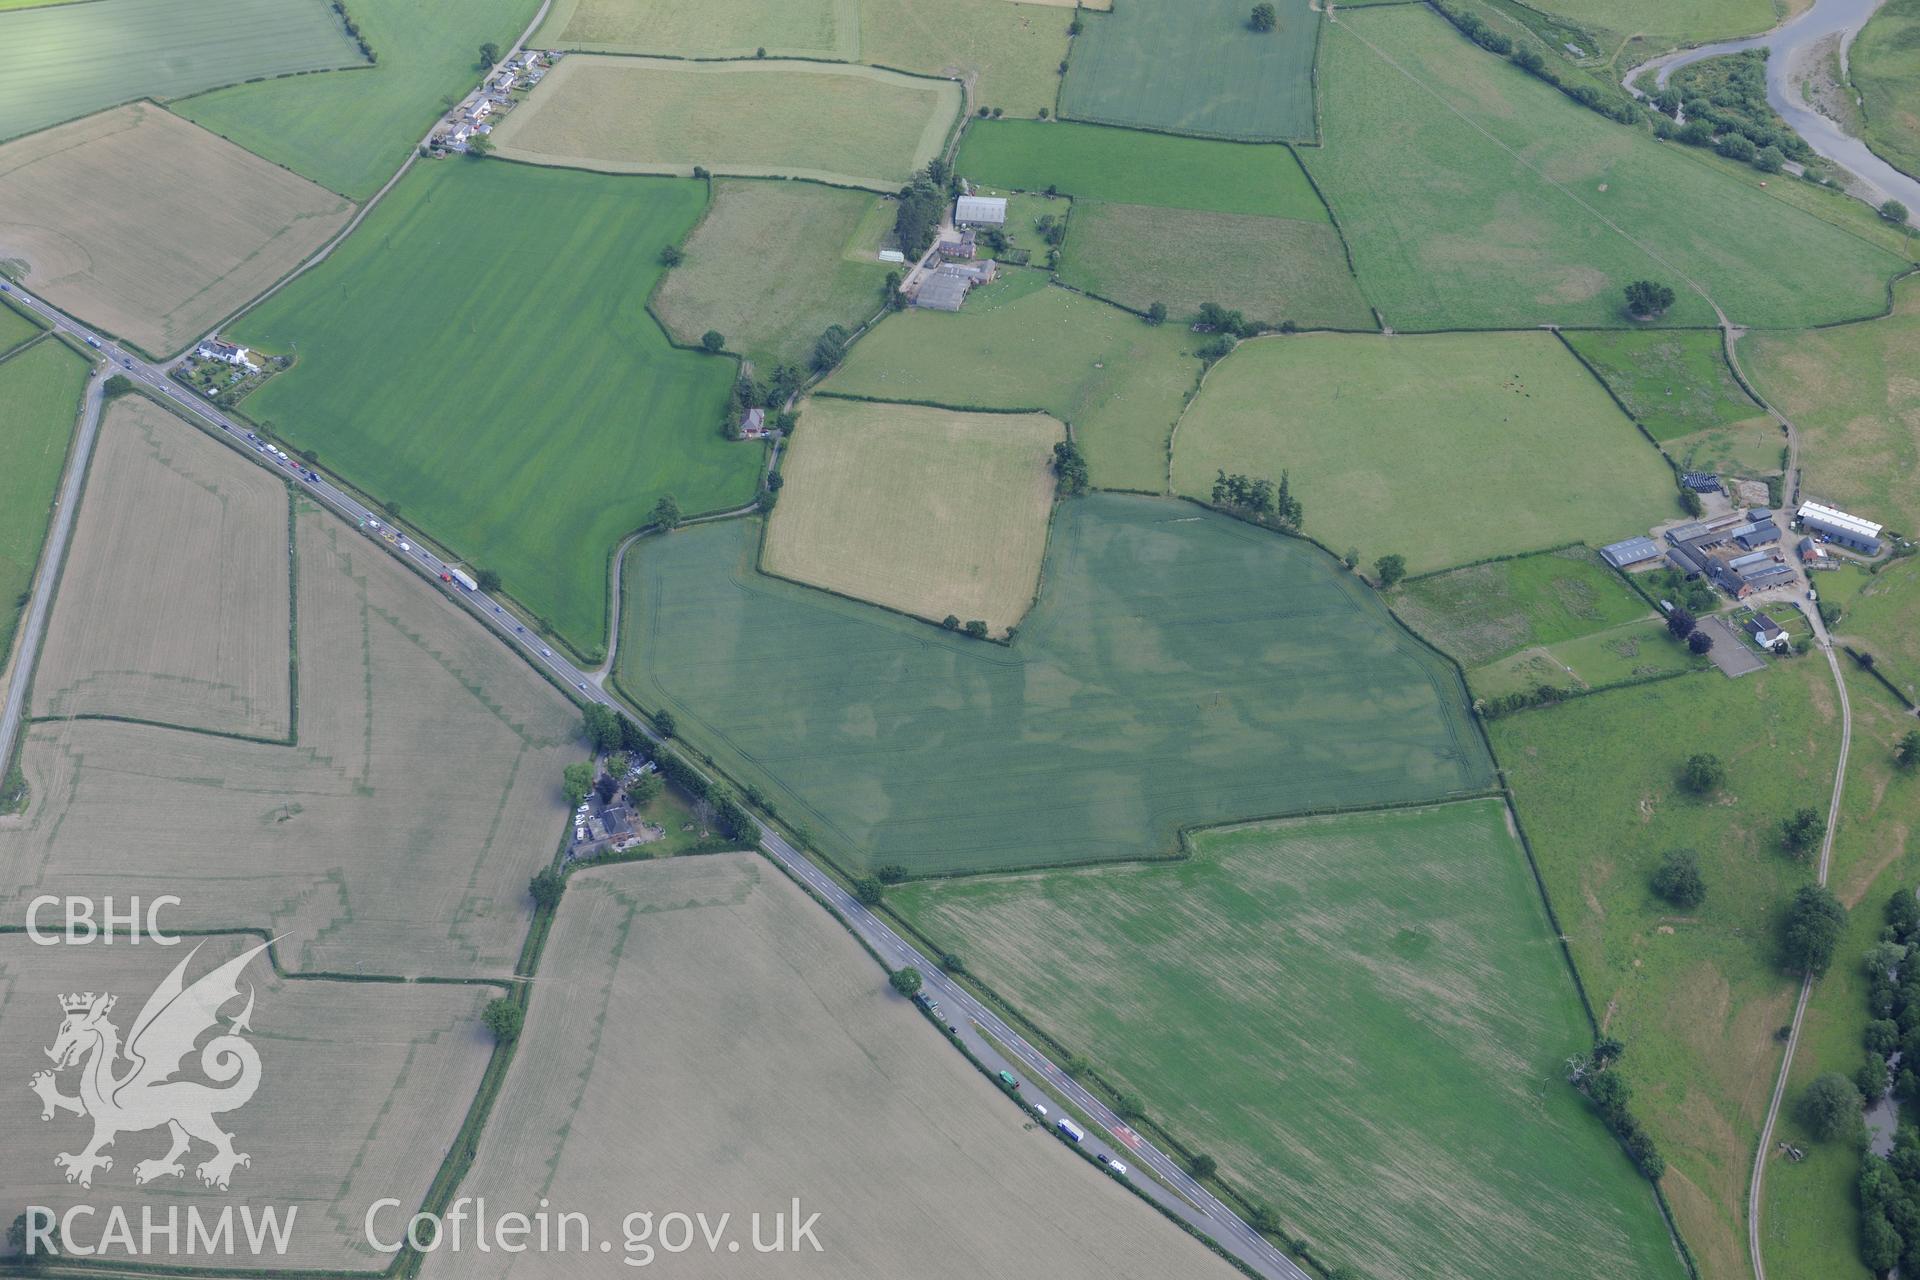 Cropmark complex on lower rectory road, east of Berriew, between Welshpool and Newtown. Oblique aerial photograph taken during the Royal Commission's programme of archaeological aerial reconnaissance by Toby Driver on 30th June 2015.